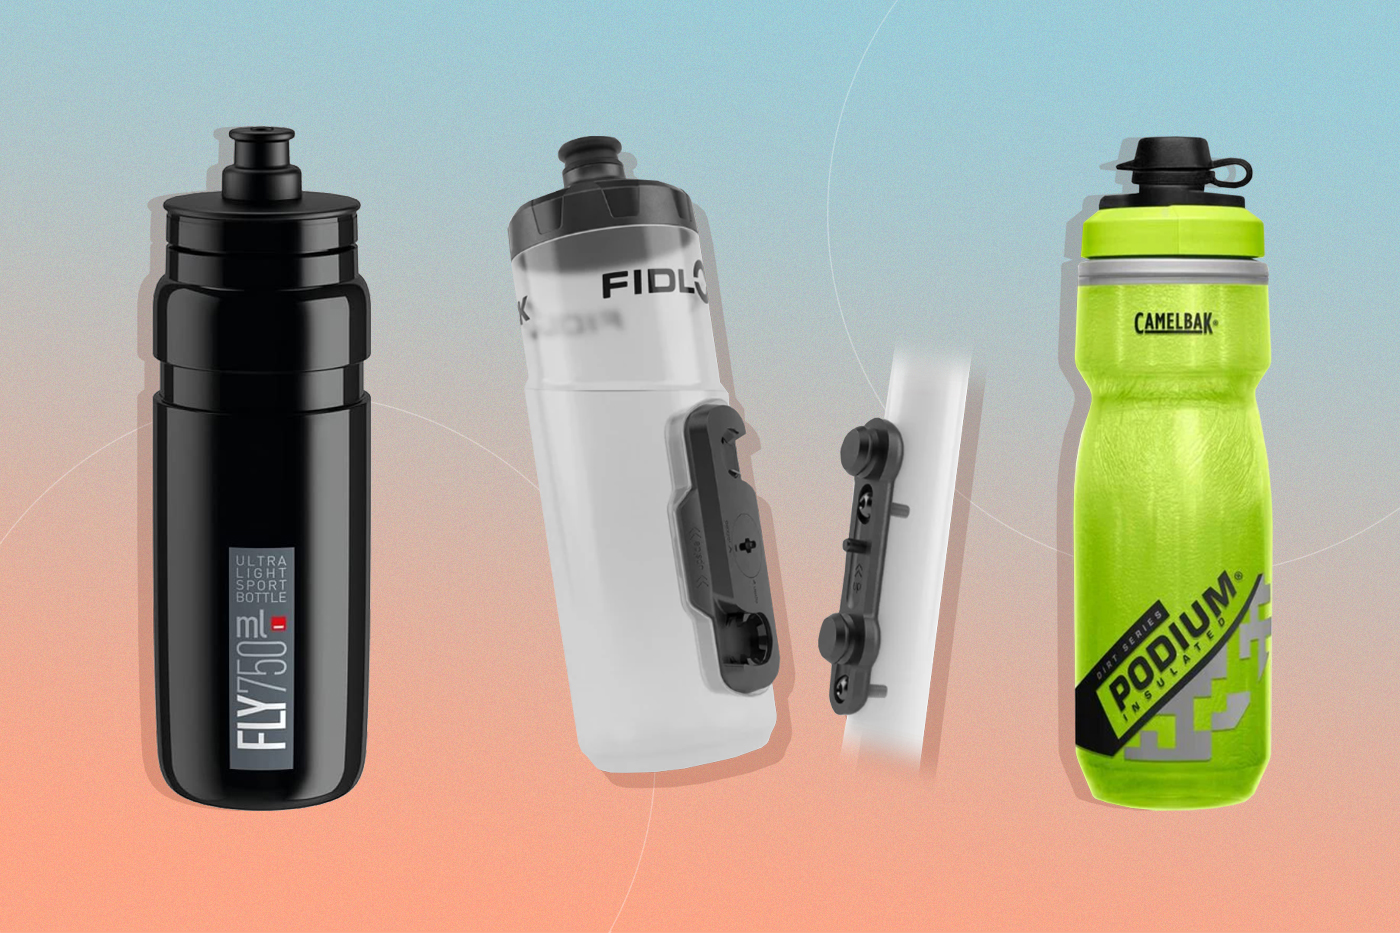 Branded Cycling Bottles - The new 'Big Drip' bidons from